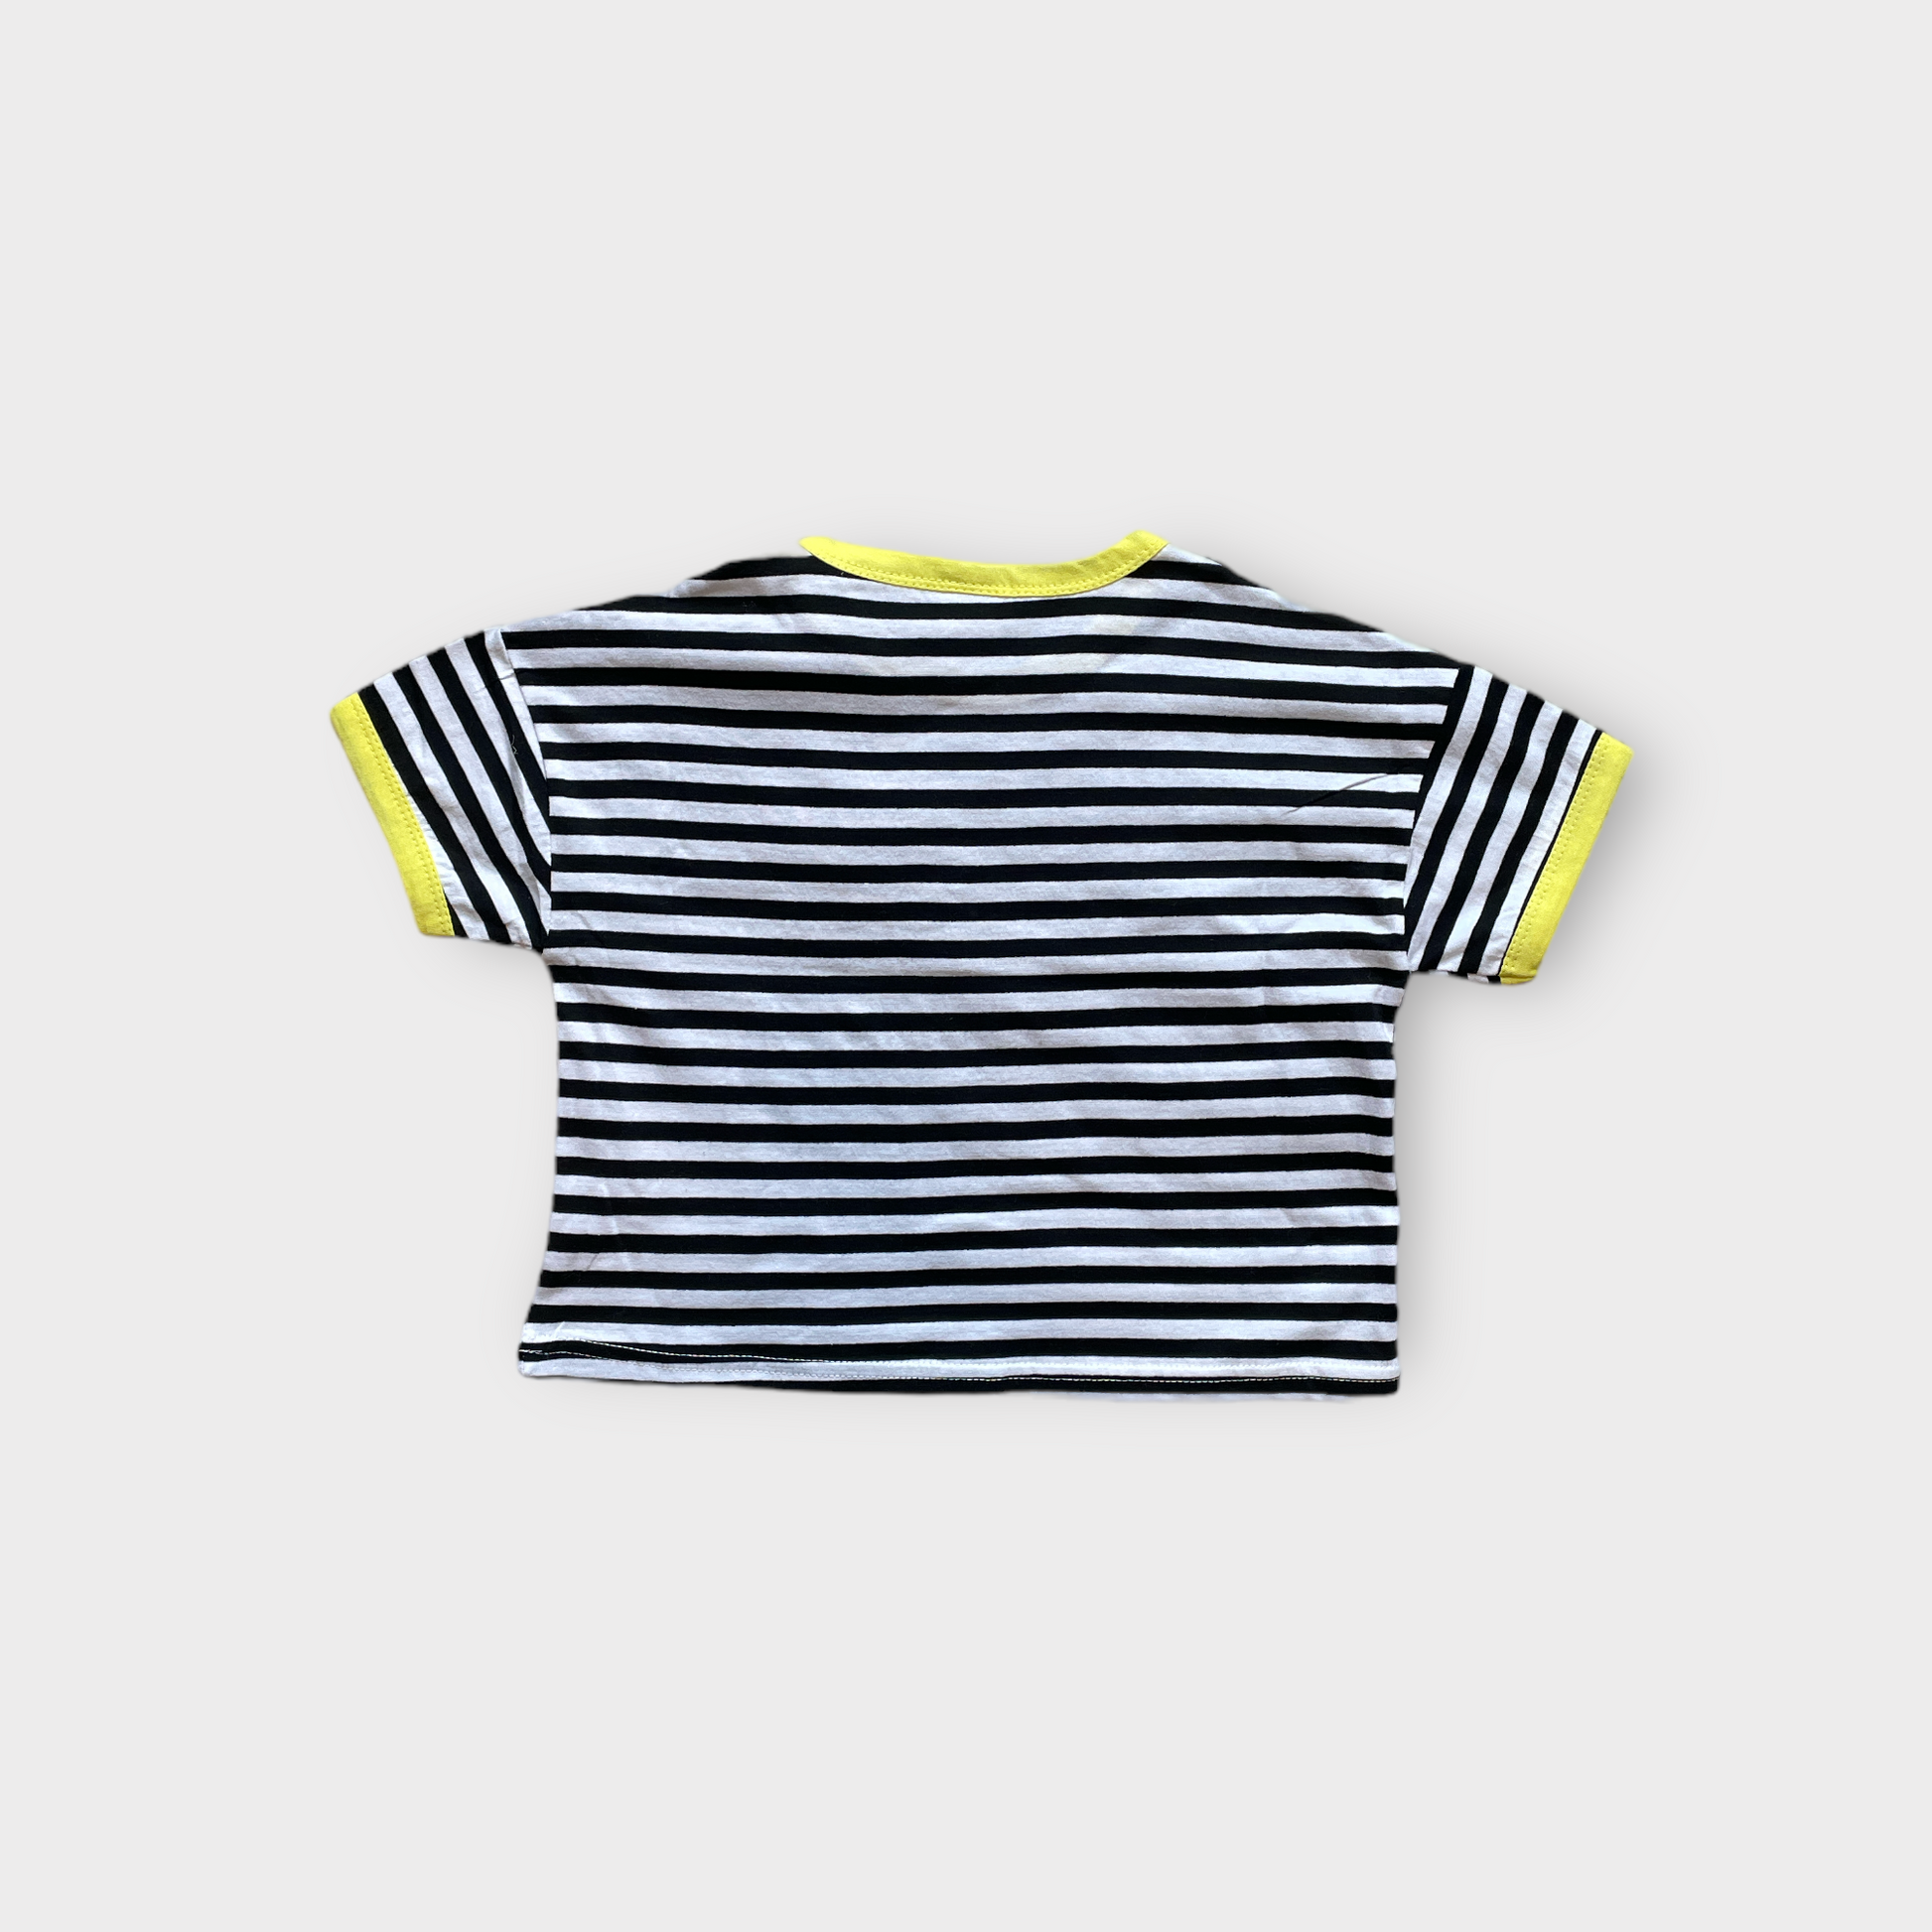 back view kids oversized black striped tee yellow details